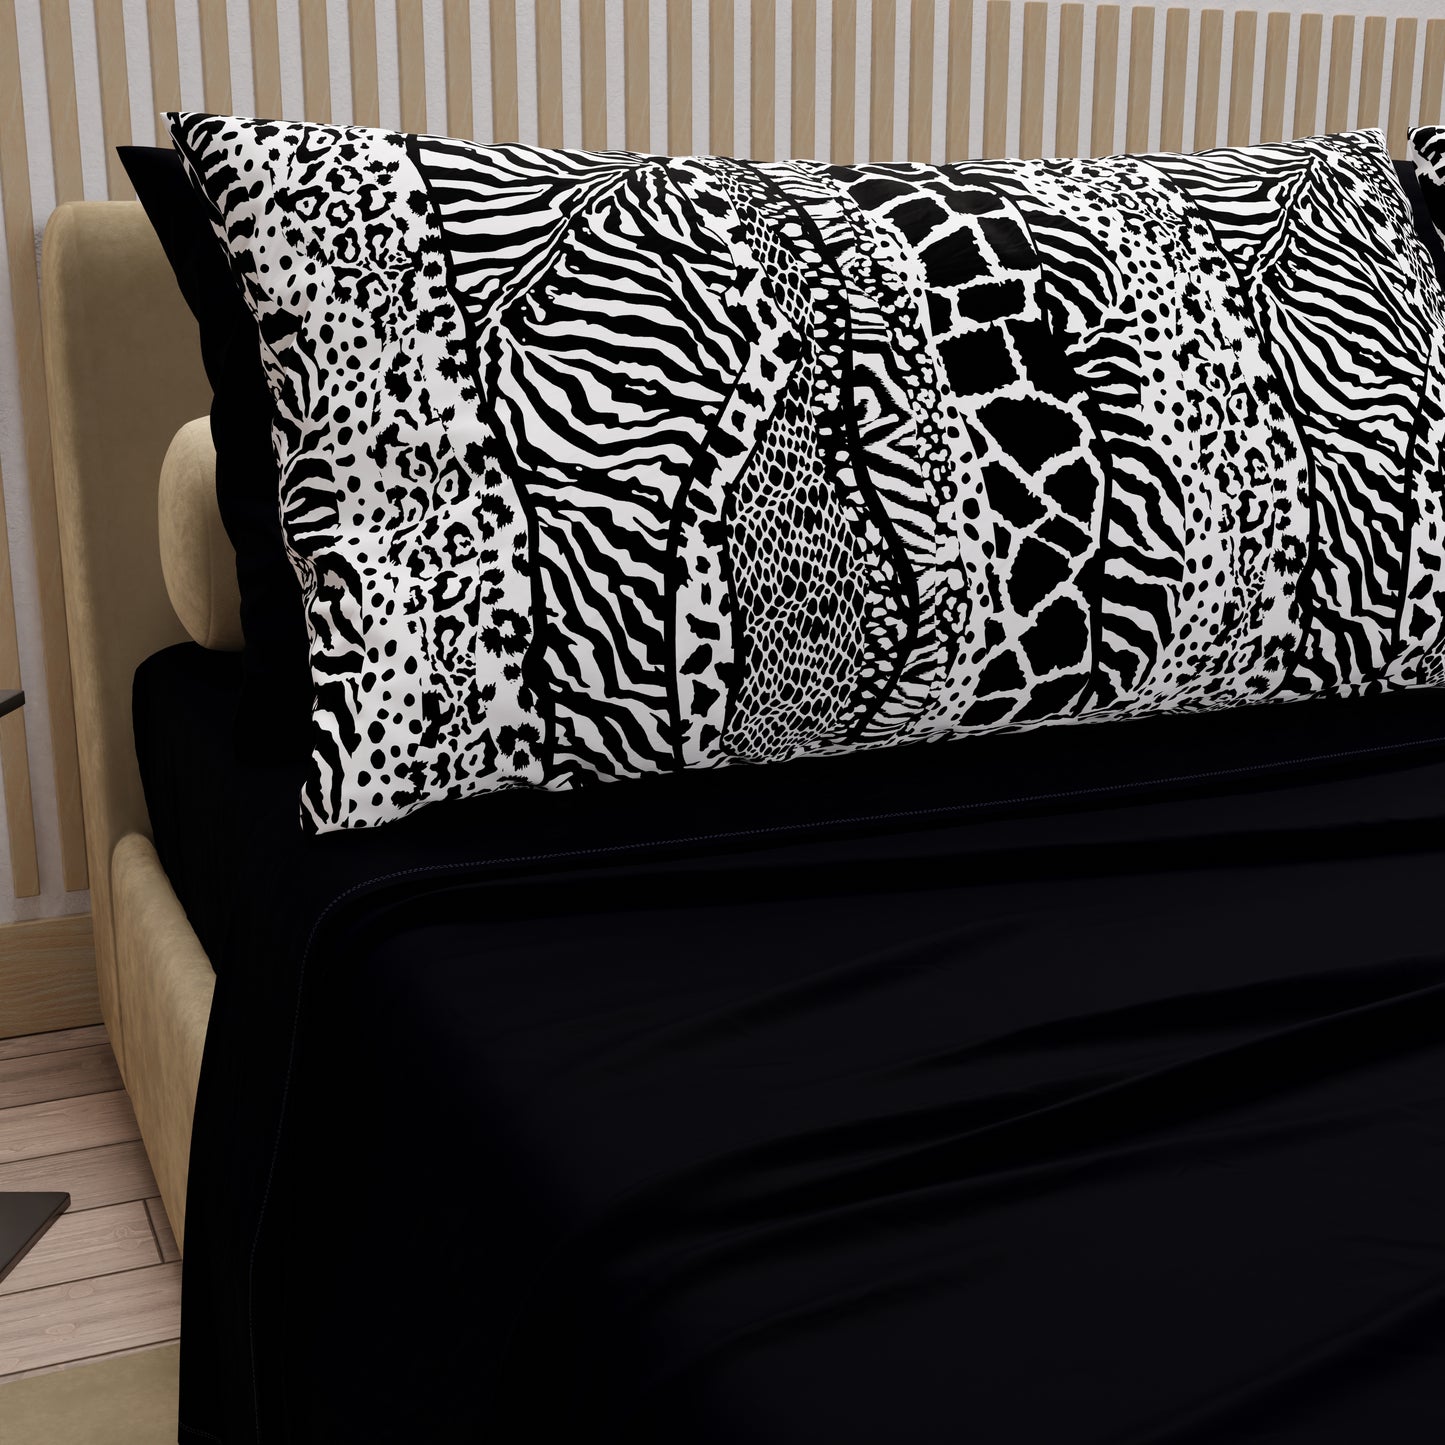 Cotton Sheets, Bed Set with Zebra Digital Animal Print Pillowcases